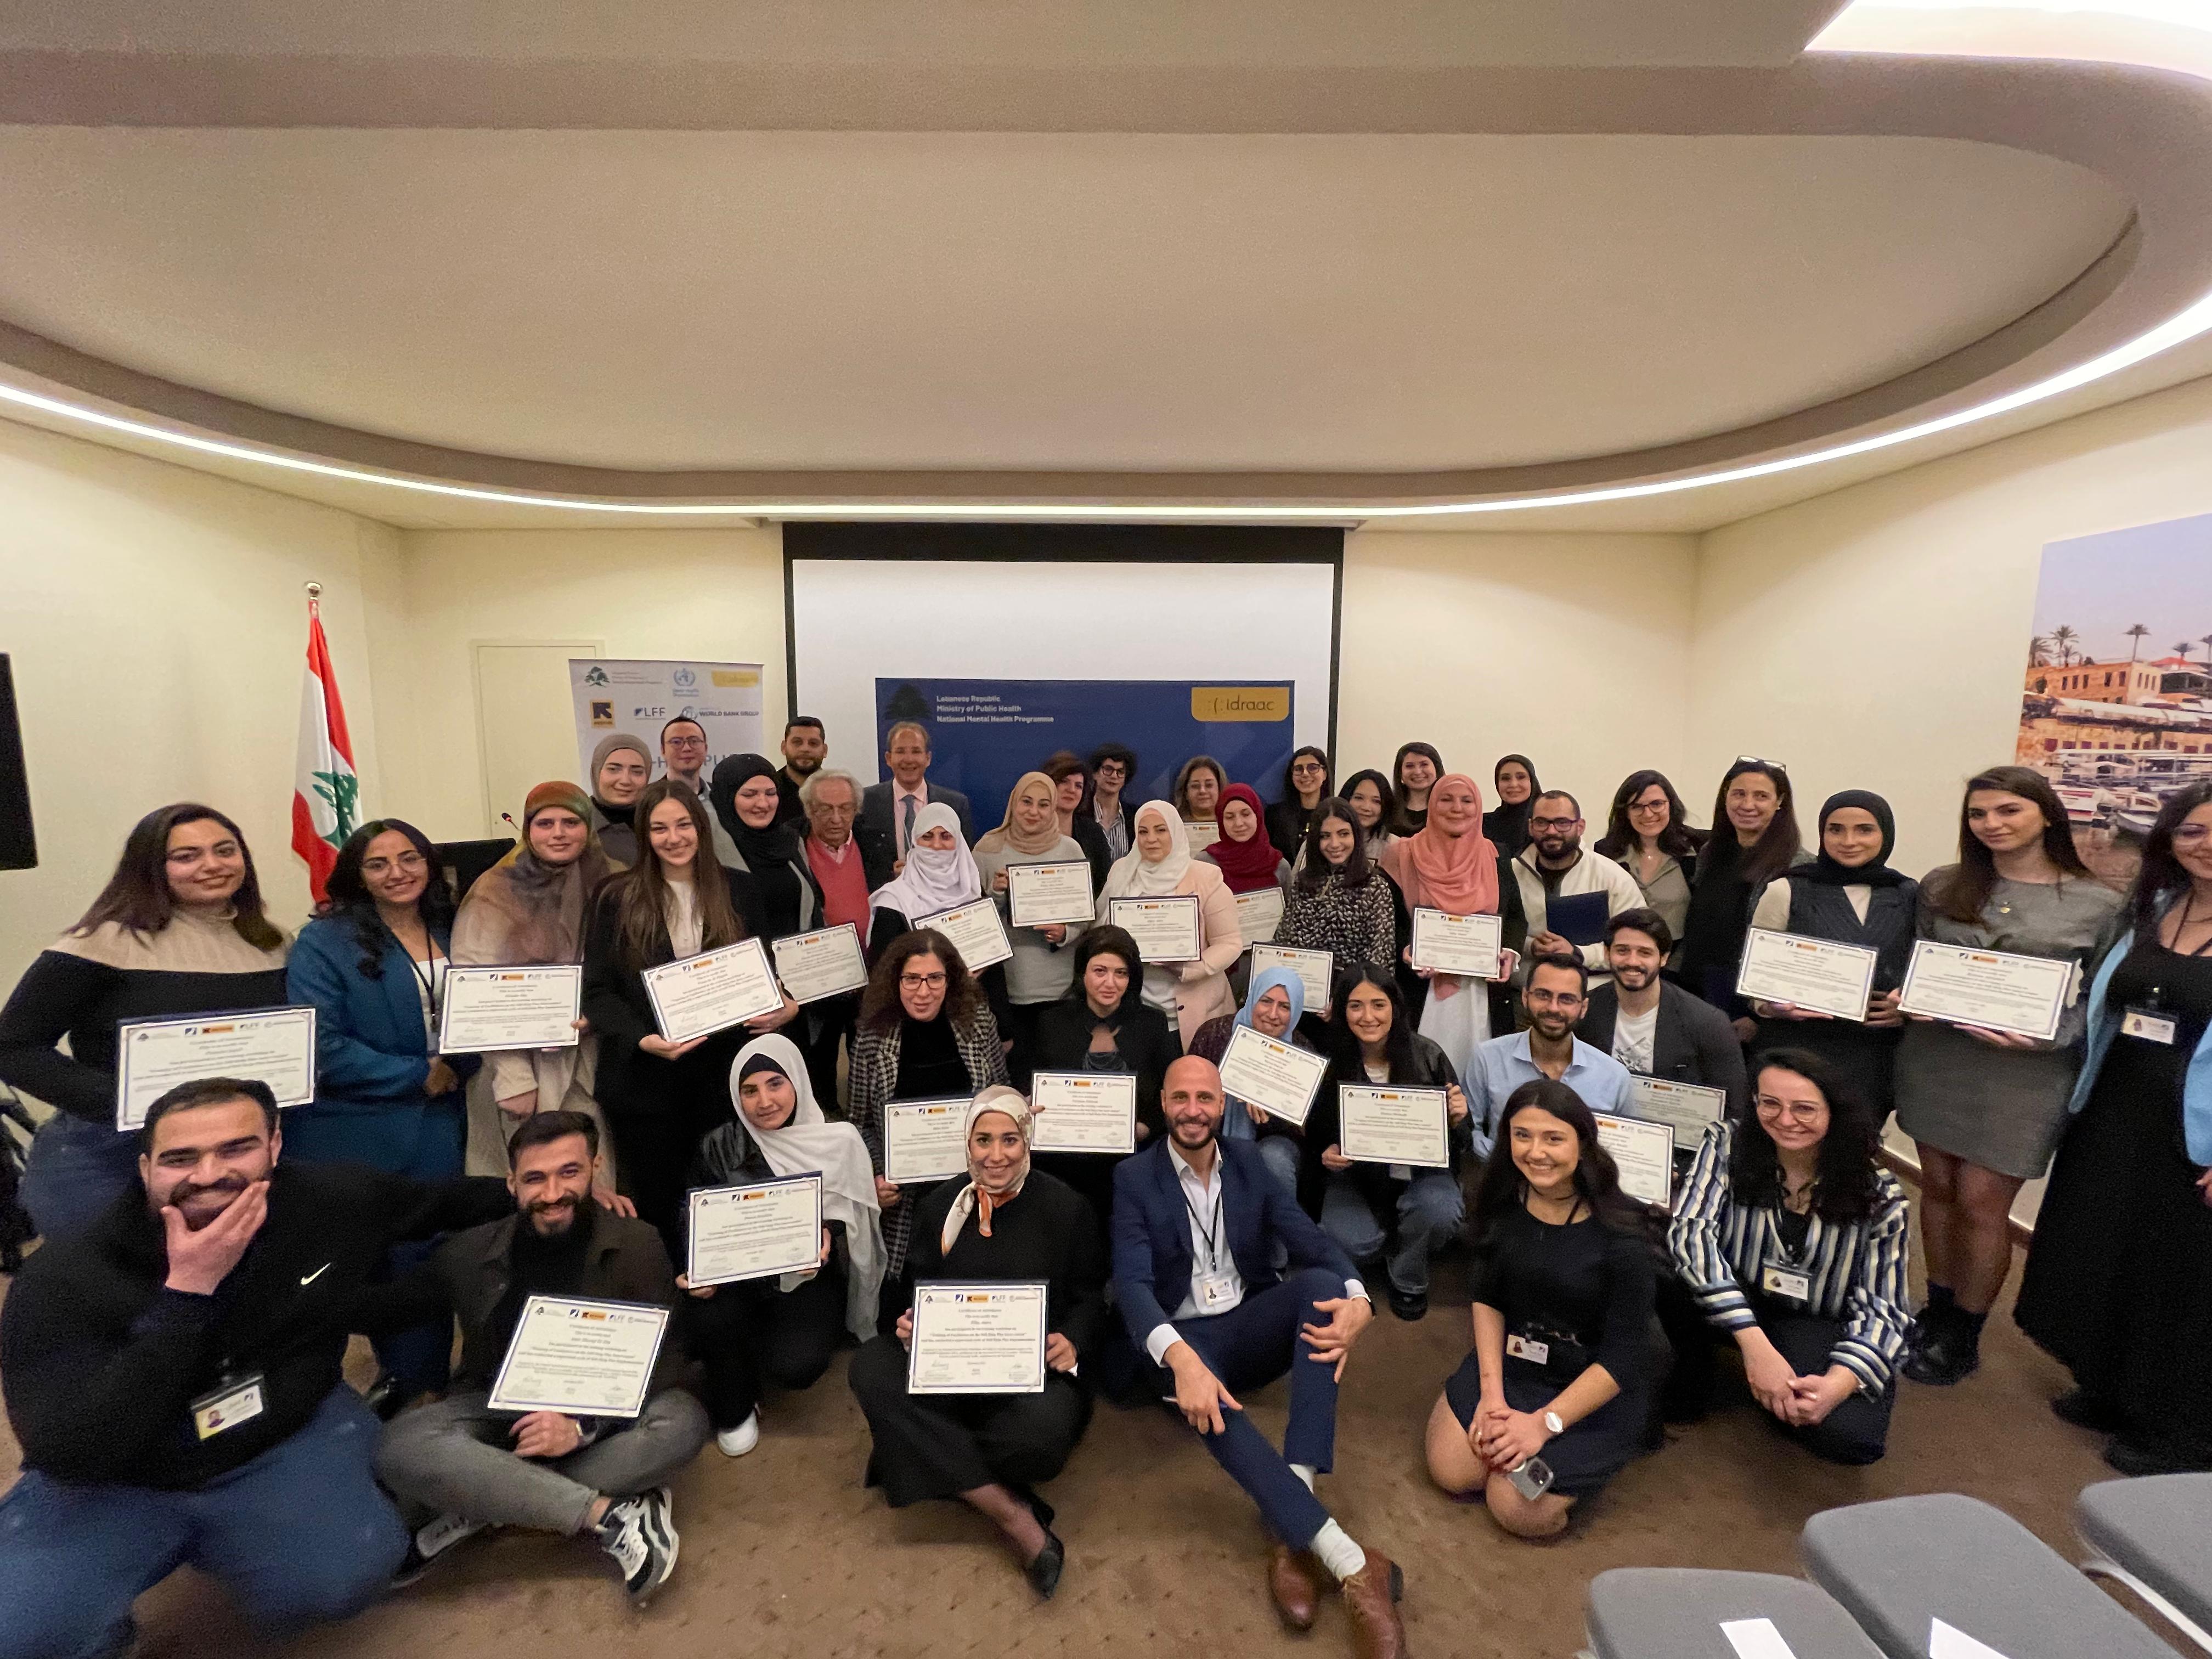 Celebrating the successful implementation of a First-Ever Stress Management Initiative in Lebanon